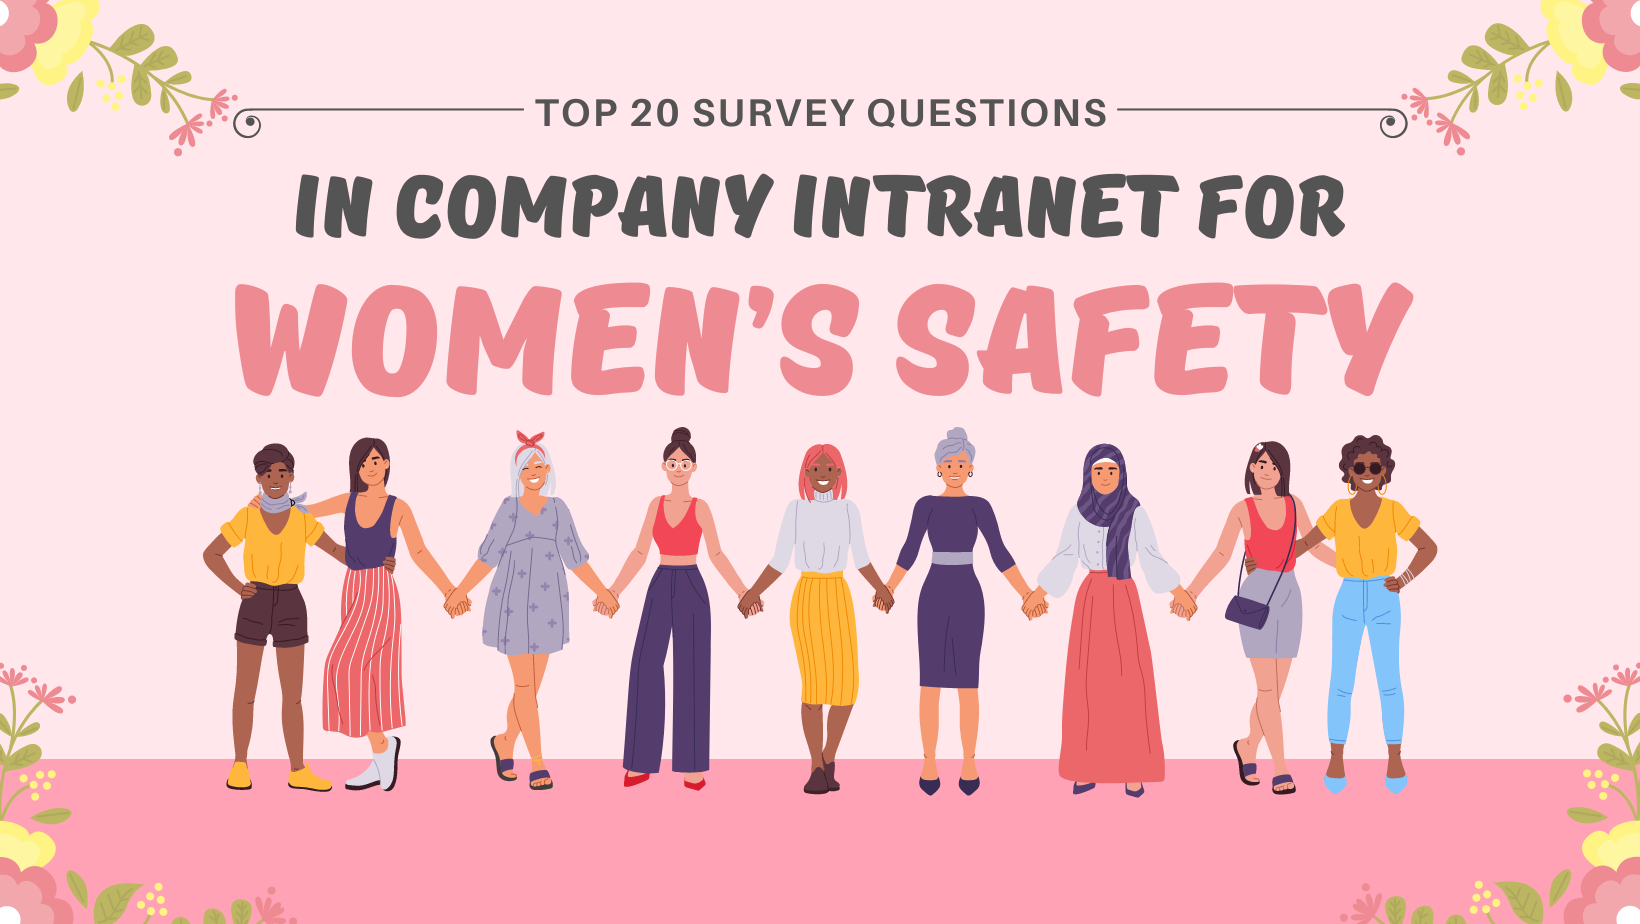 Top 20 survey questions to be asked in company intranet for Women’s safety.